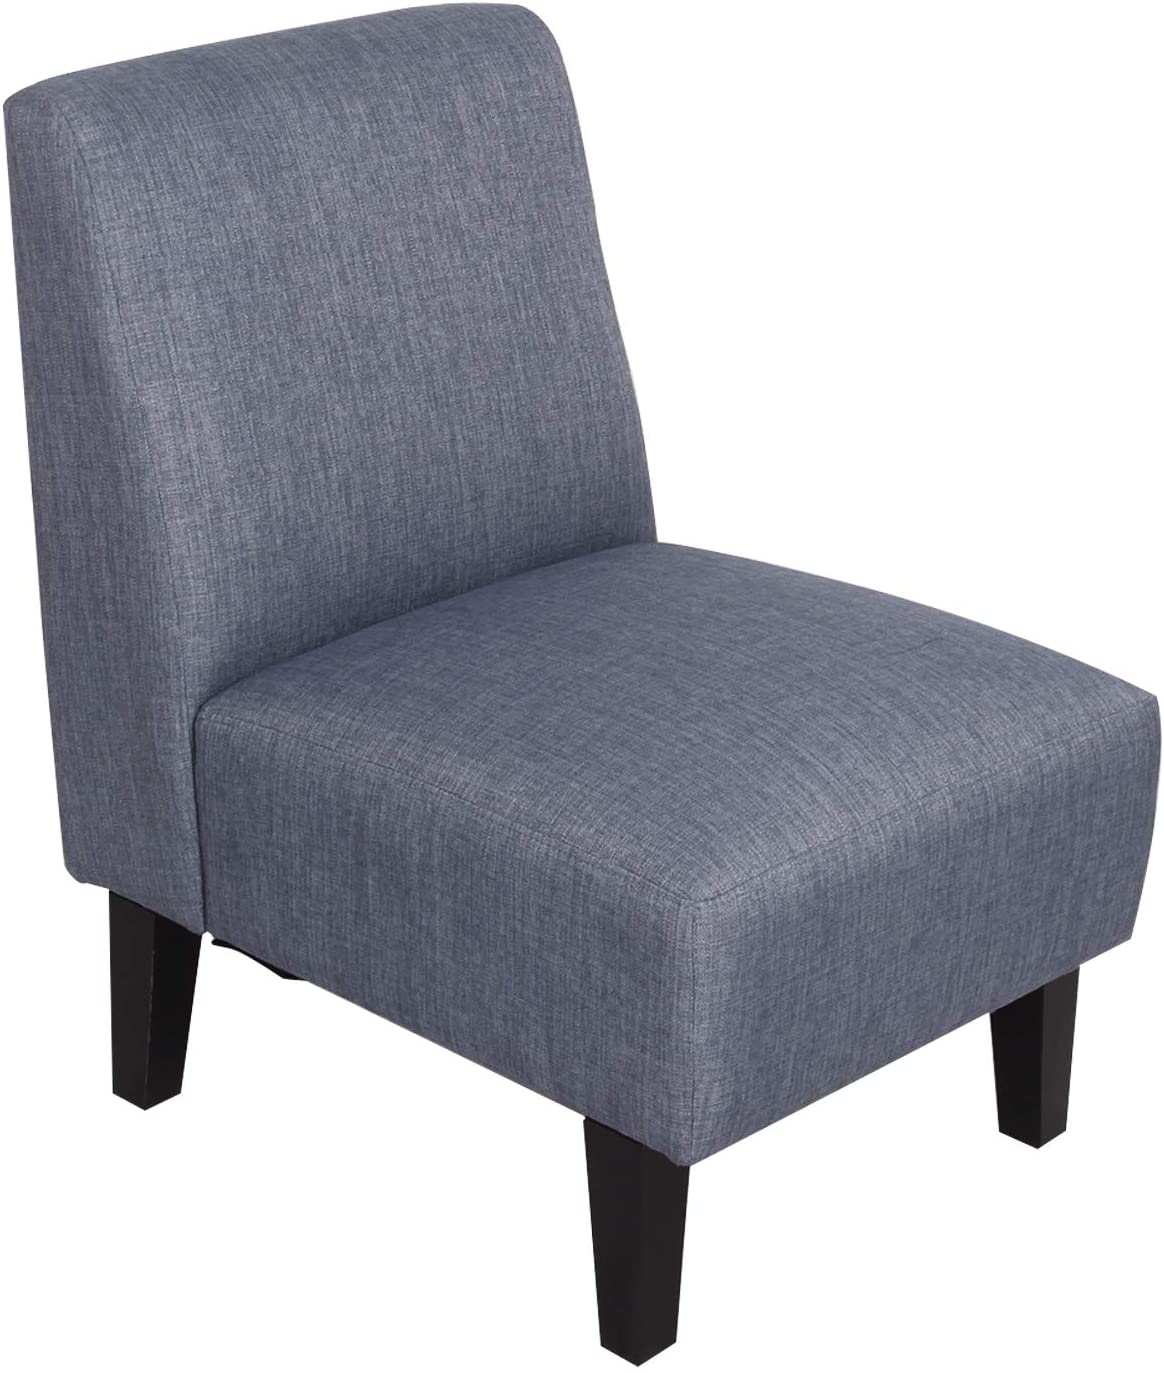 B08SC88SS9 sogesfurniture Laguna Accent Chair with Solid Wood Legs, Armless Fabric Accent Chair, Kitchen Dining Chair Living Room Corner Chair, Blue BHUS-WH-5088